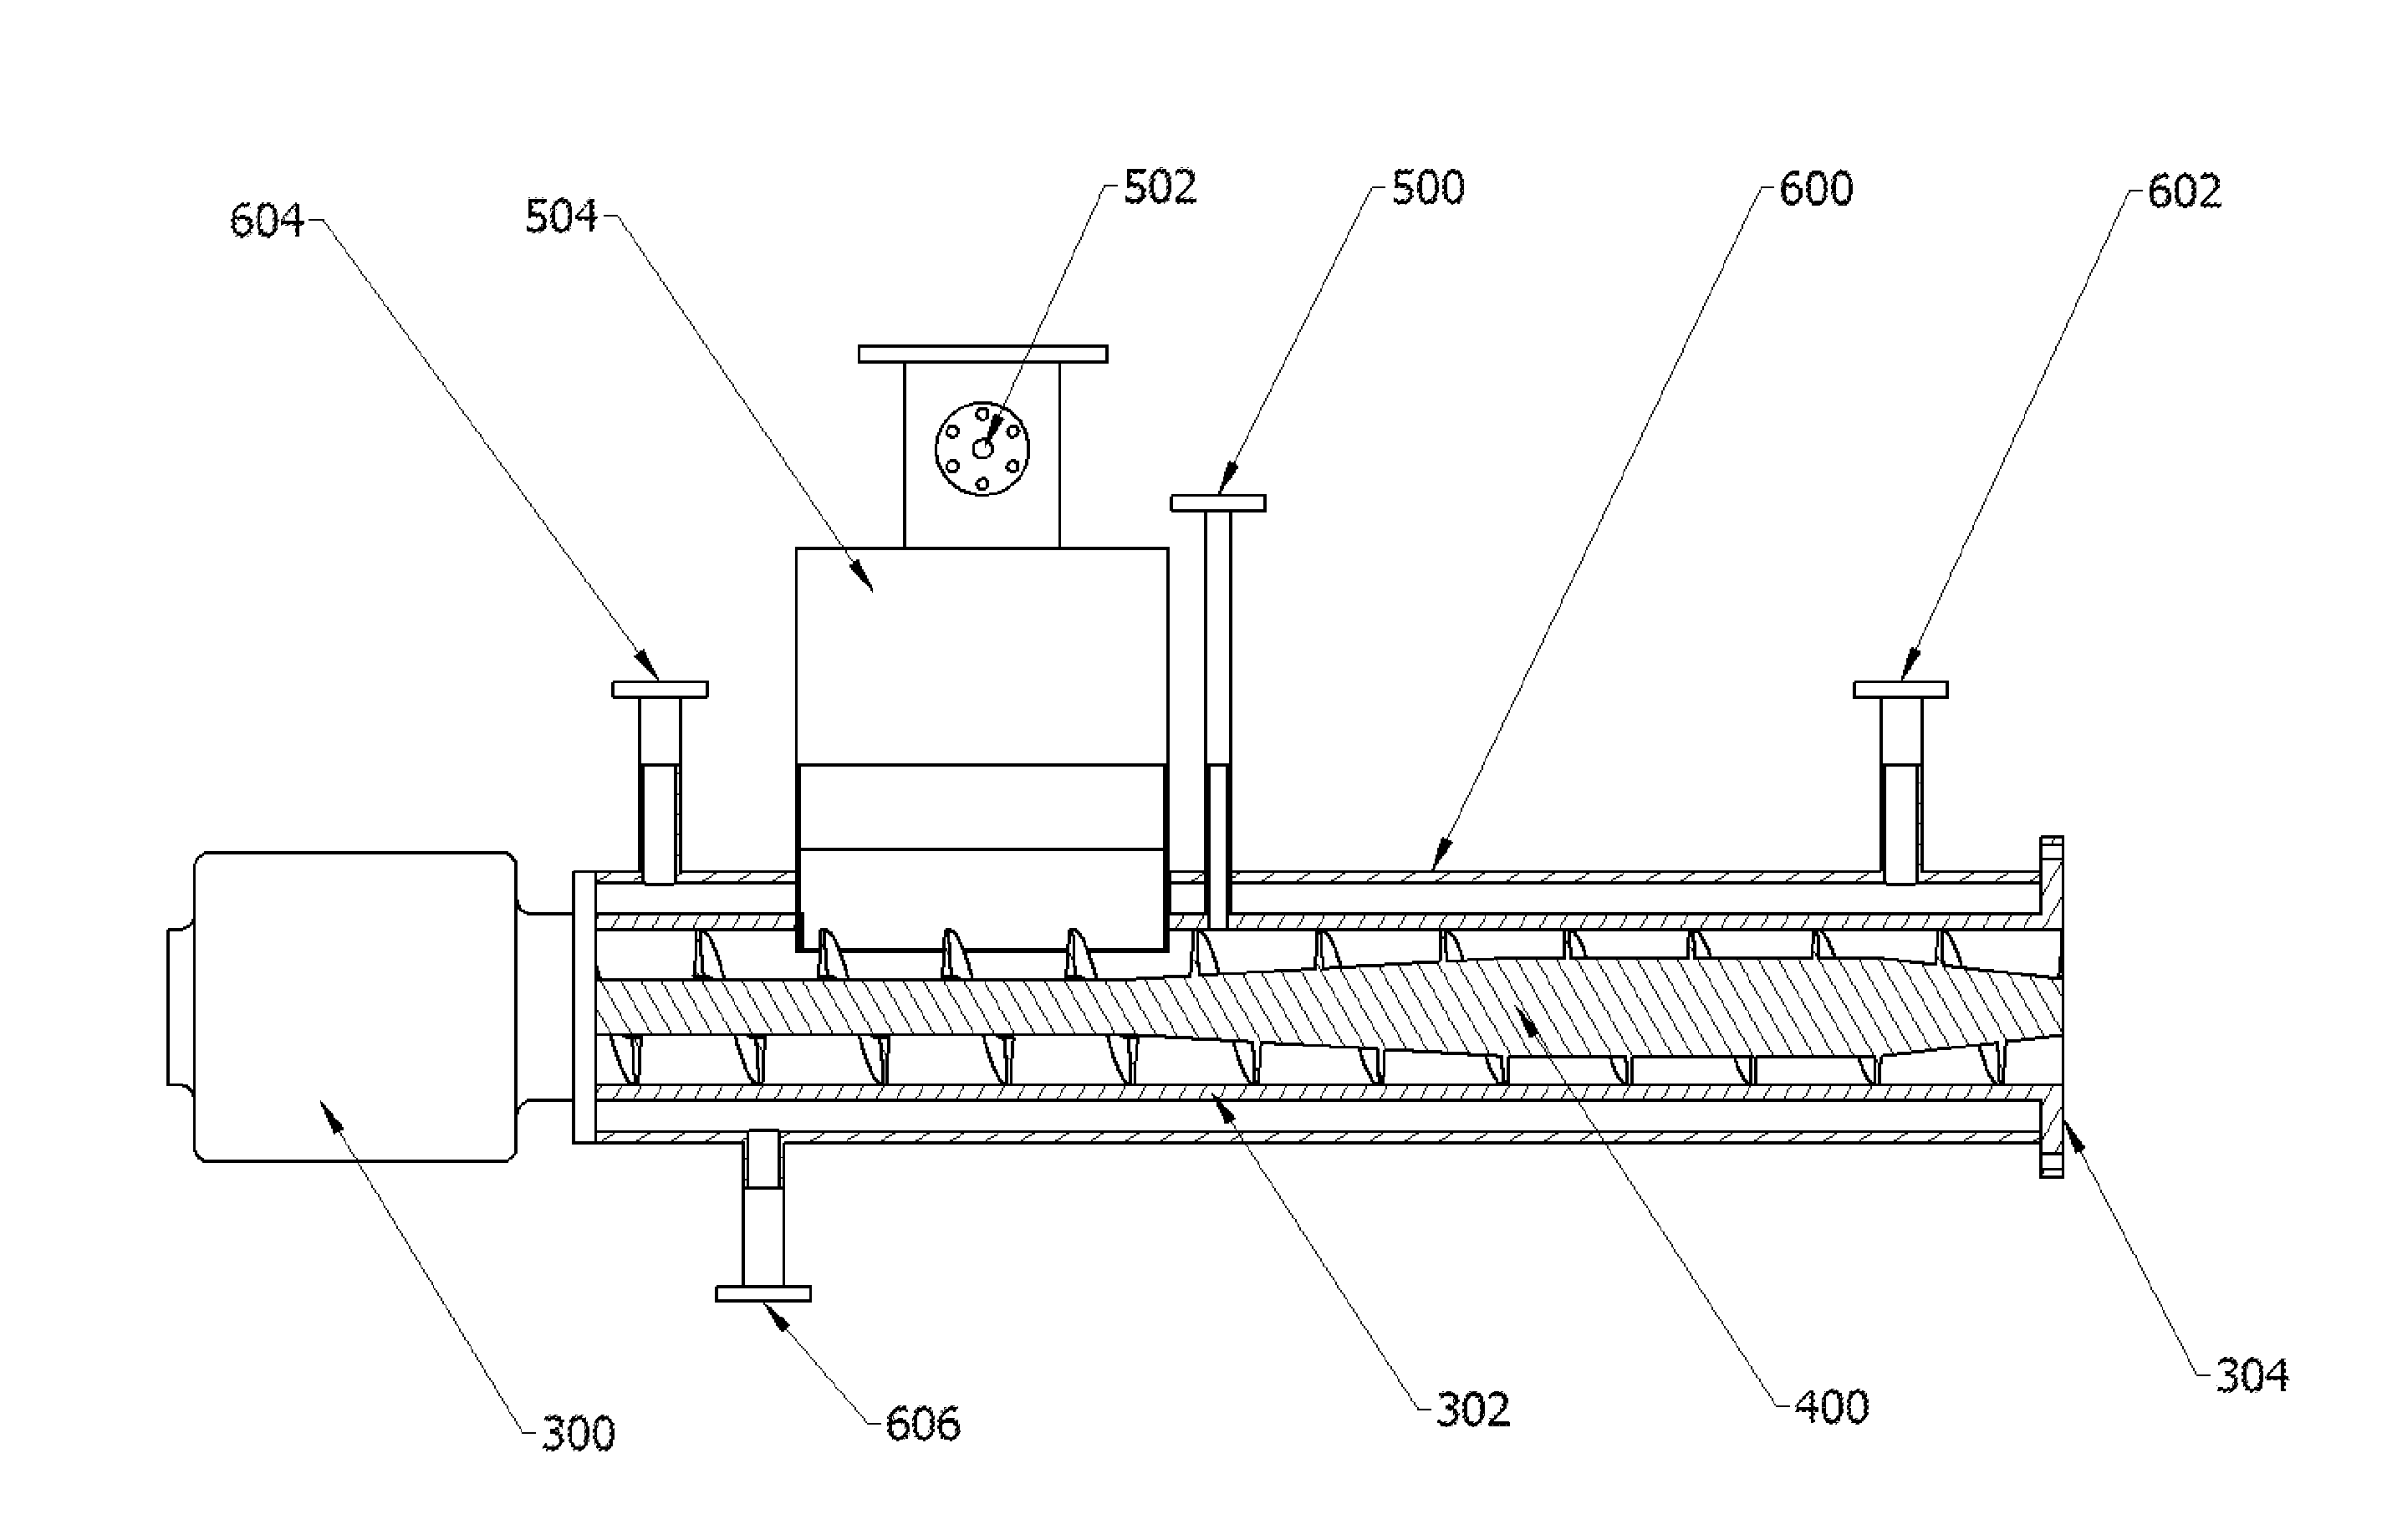 System and method for processing material to generate syngas